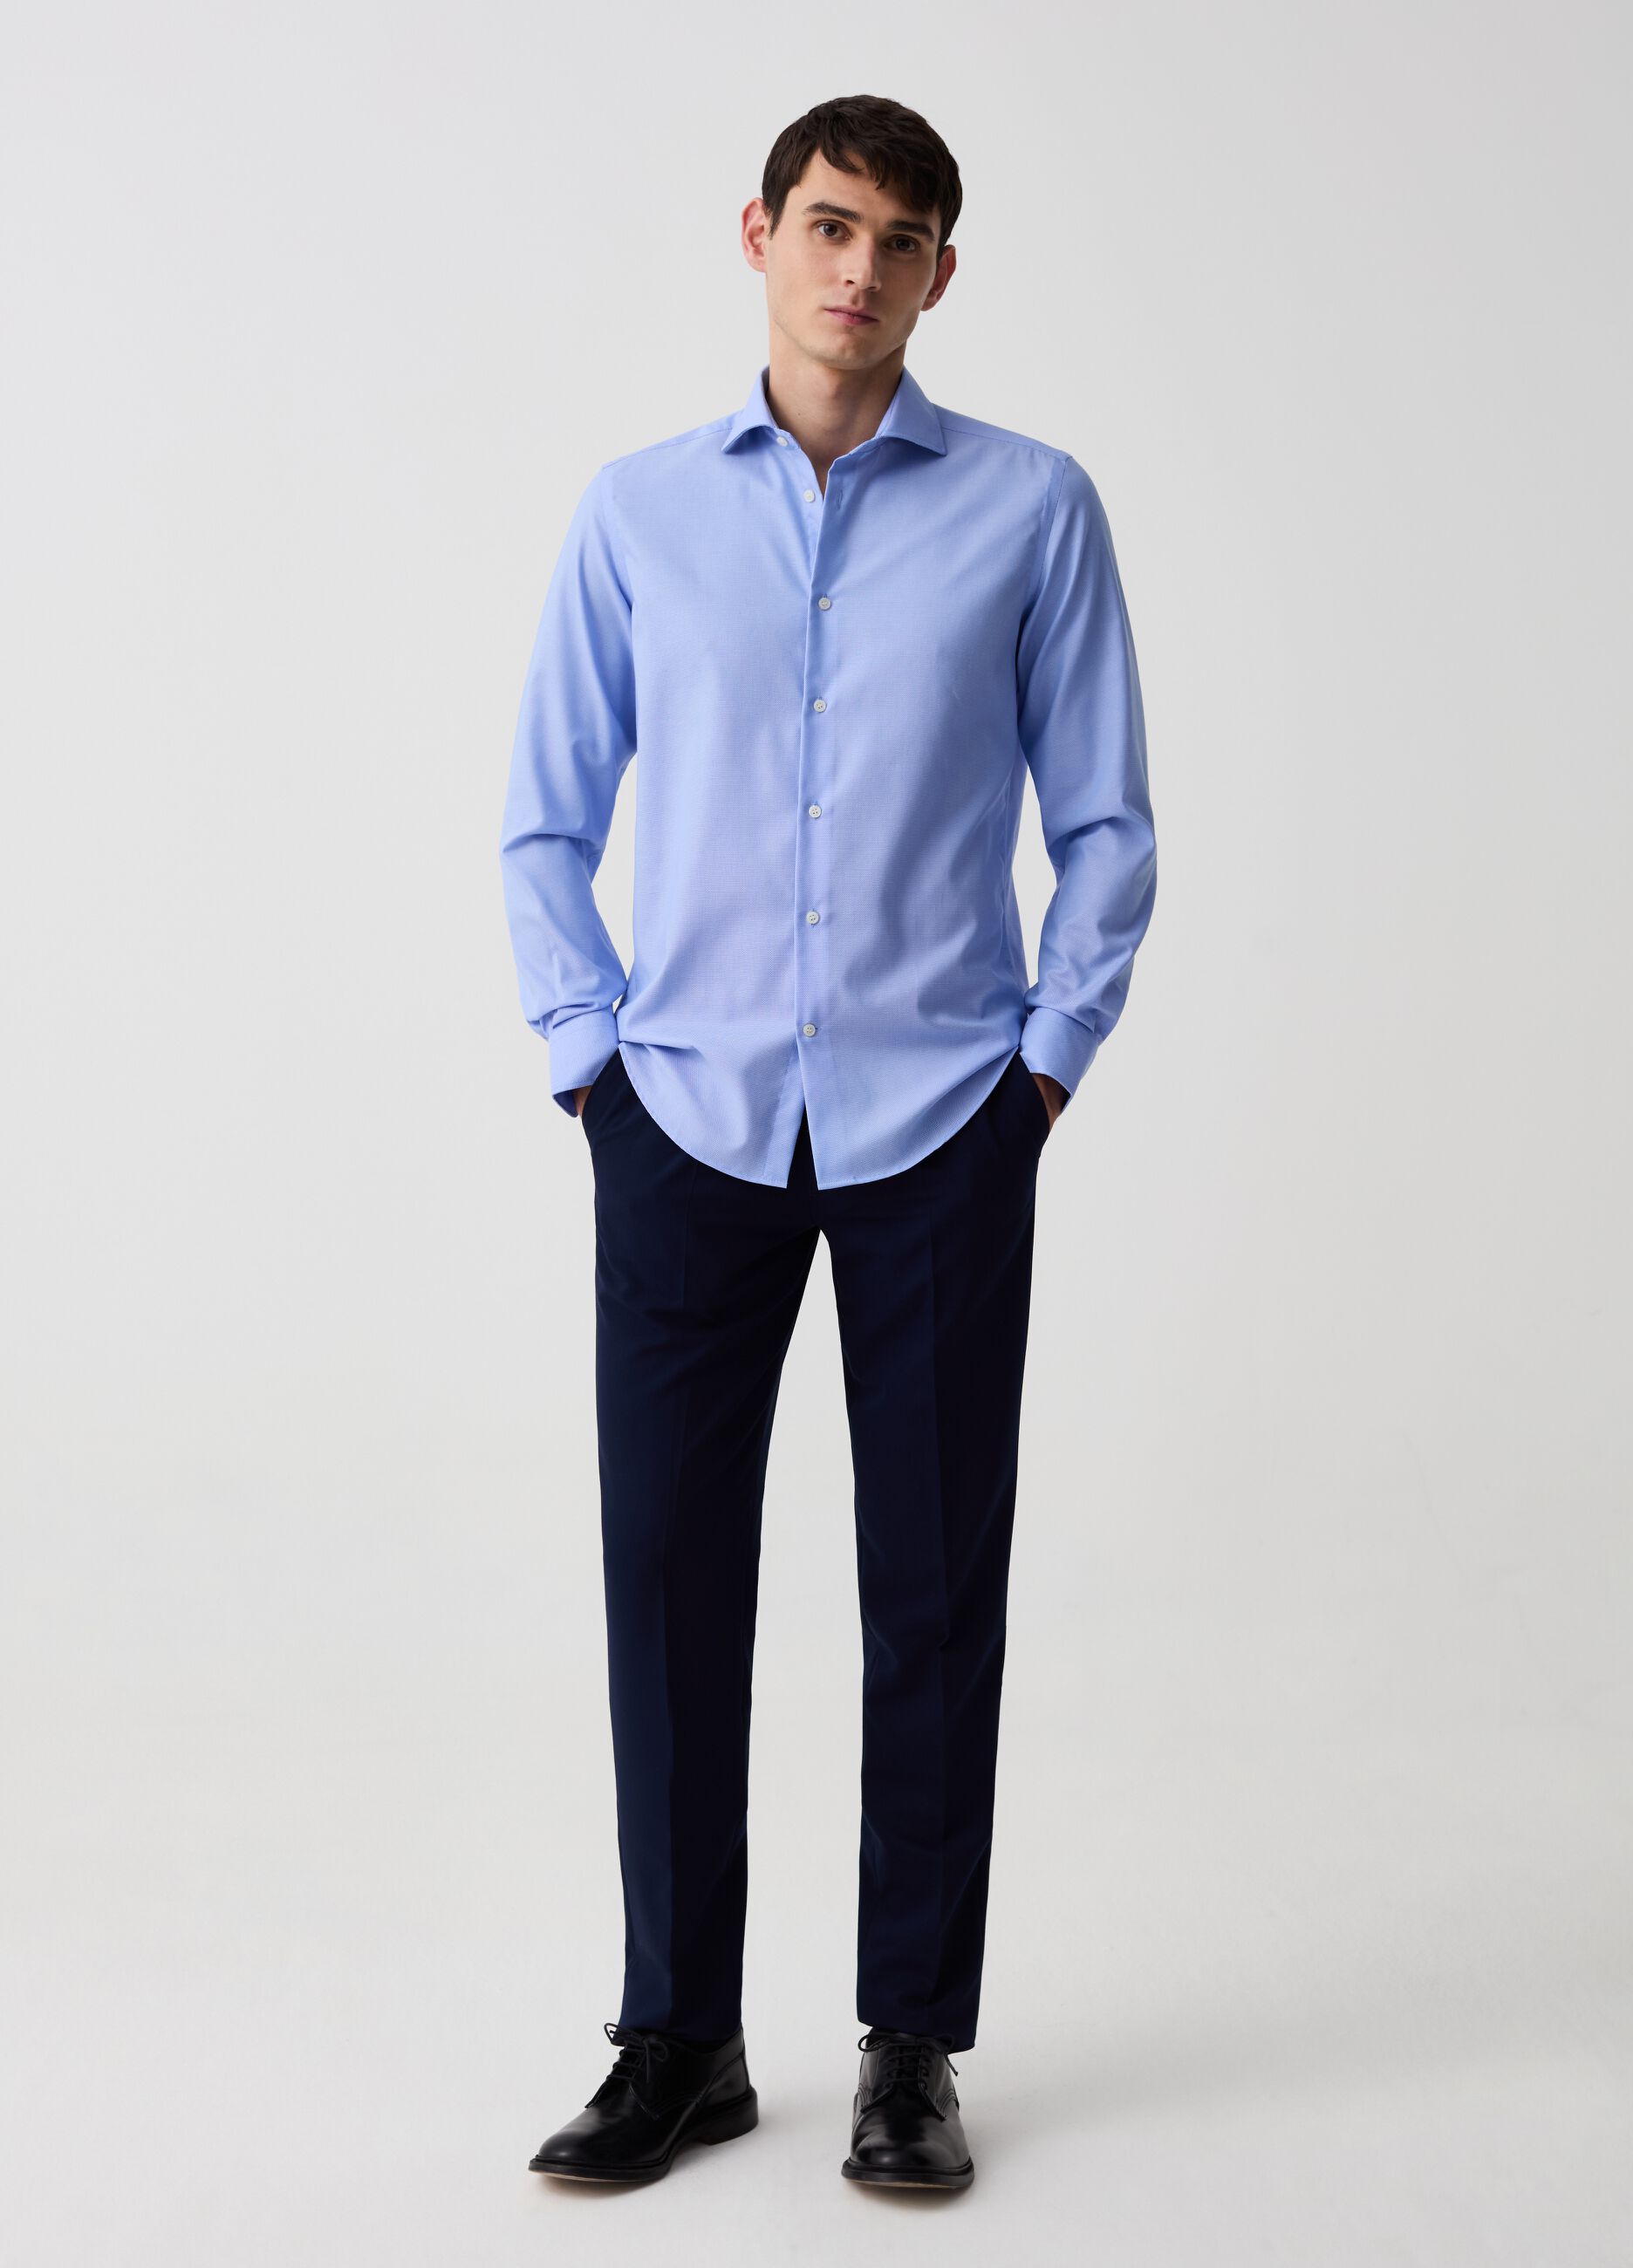 Slim-fit shirt in no-iron Oxford